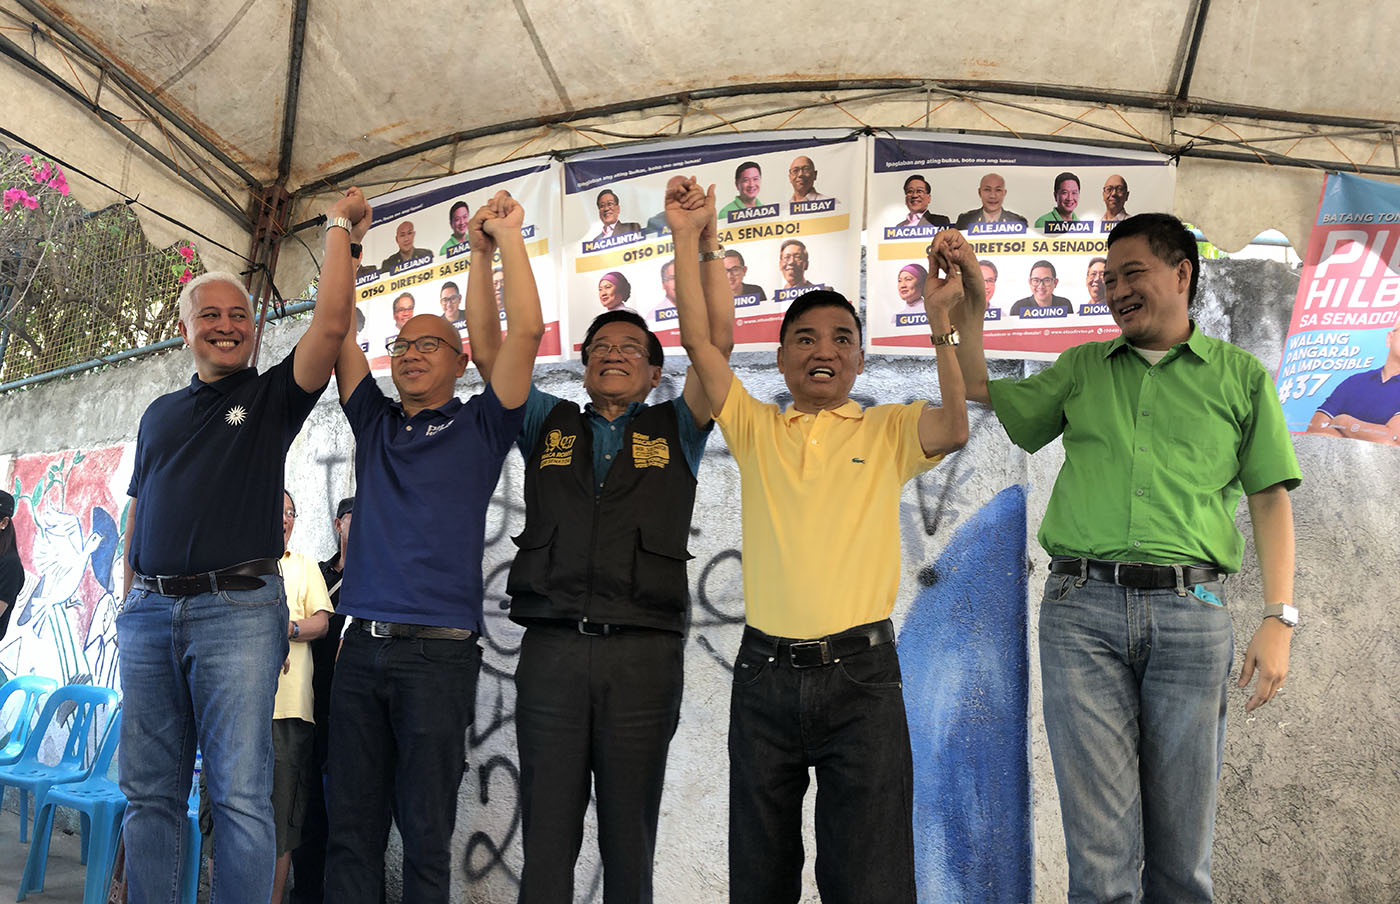 MAYOR'S ENDORSEMENT. Muntinlupa City Mayor Jaime Fresnedi (2nd from R) raises the hands of Otso Diretso candidates in a campaign event on March 5, 2019. Photo by Mara Cepeda/Rappler 